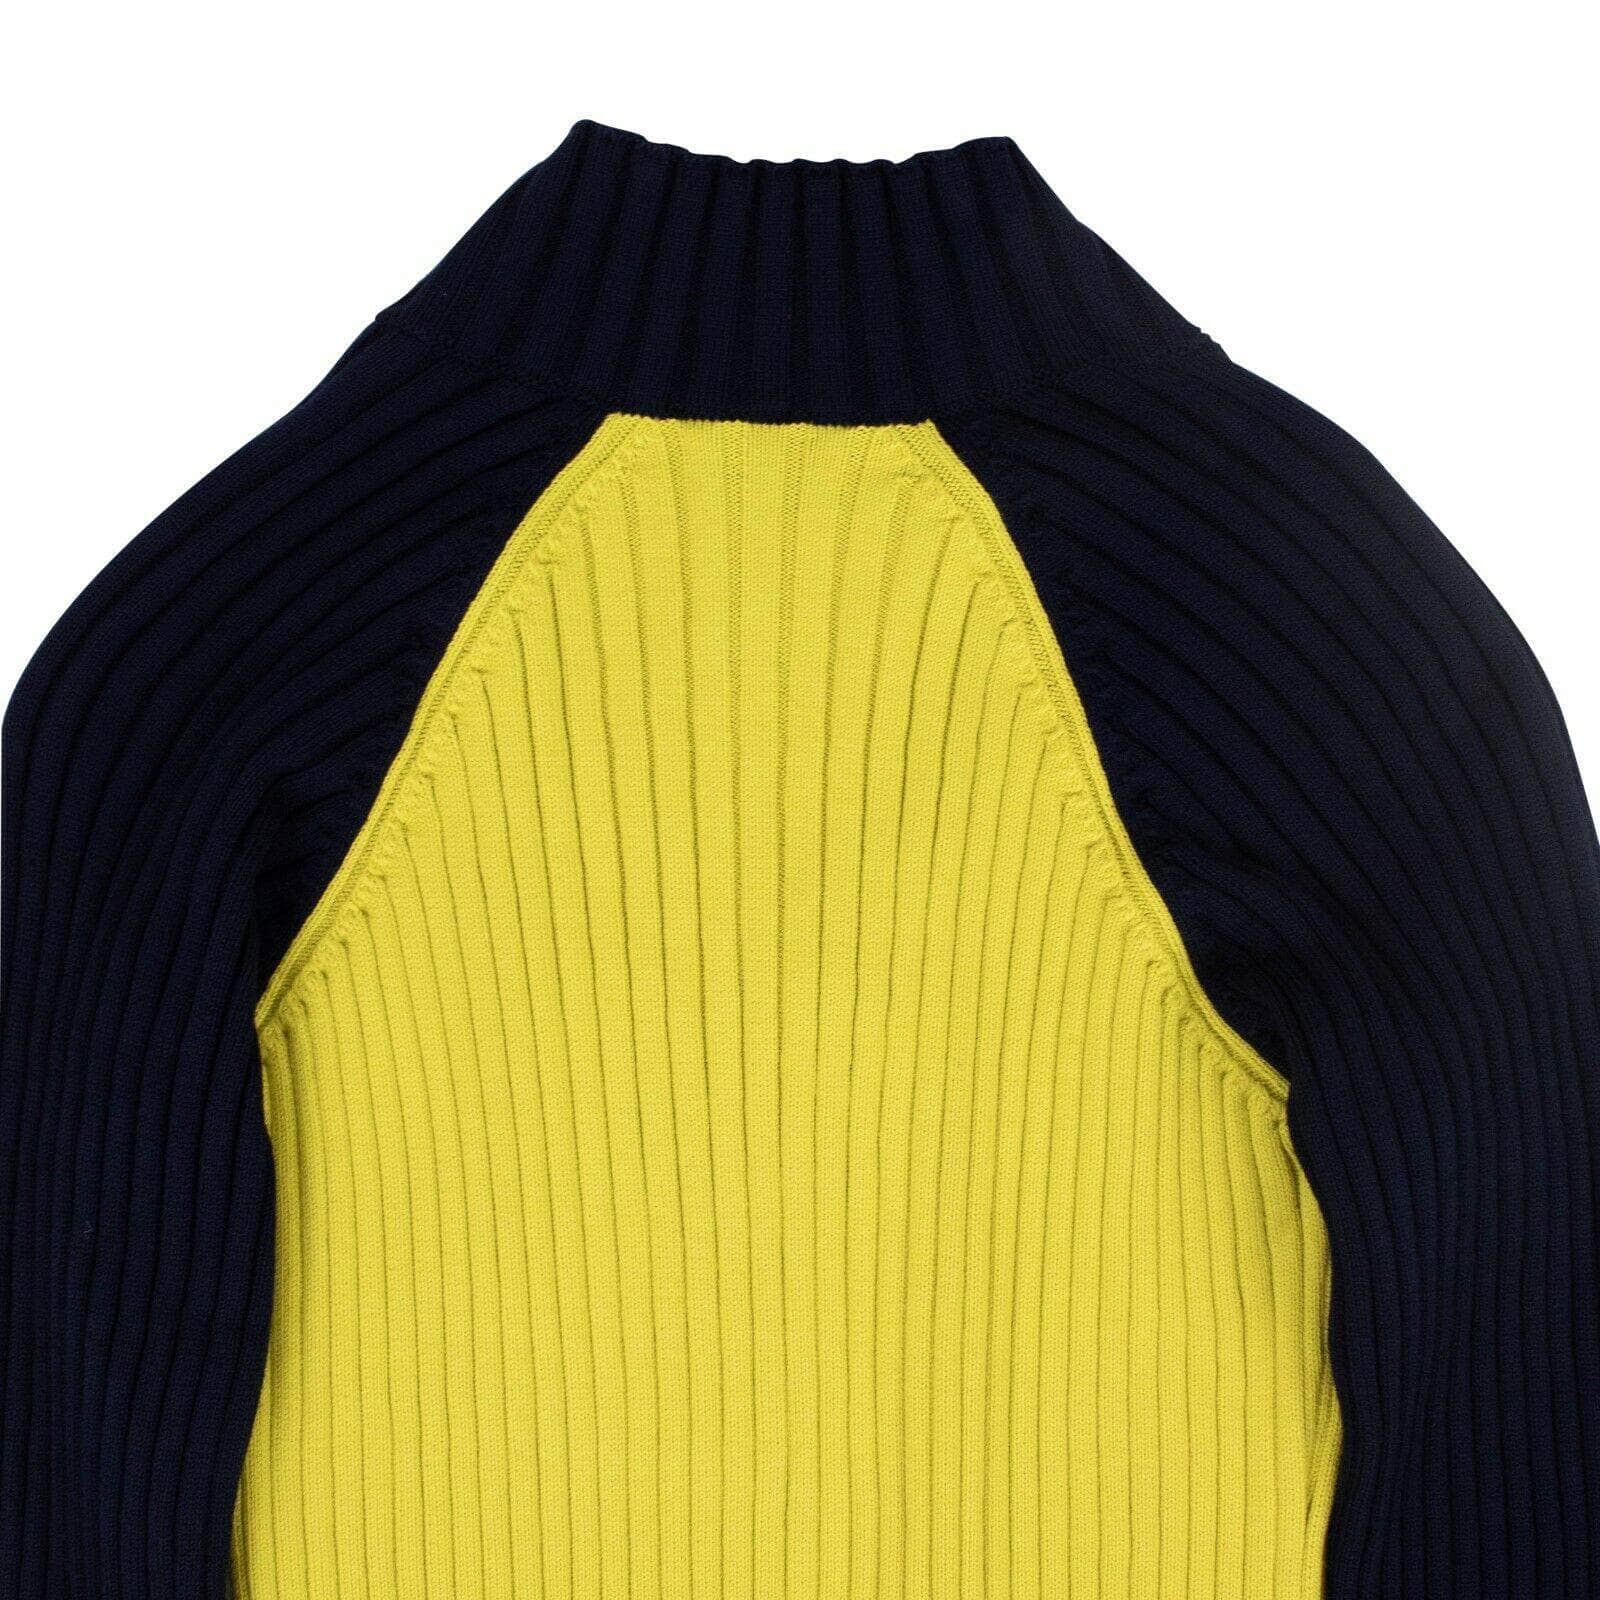 Heron Preston 250-500, chicmi, couponcollection, do-not-use-womens-dresses, dress, gender-womens, heron-preston, main-clothing, size-s, womens-dresses S Navy And Yellow Ribbed Knit Dress 82NGG-HP-1235/S 82NGG-HP-1235/S